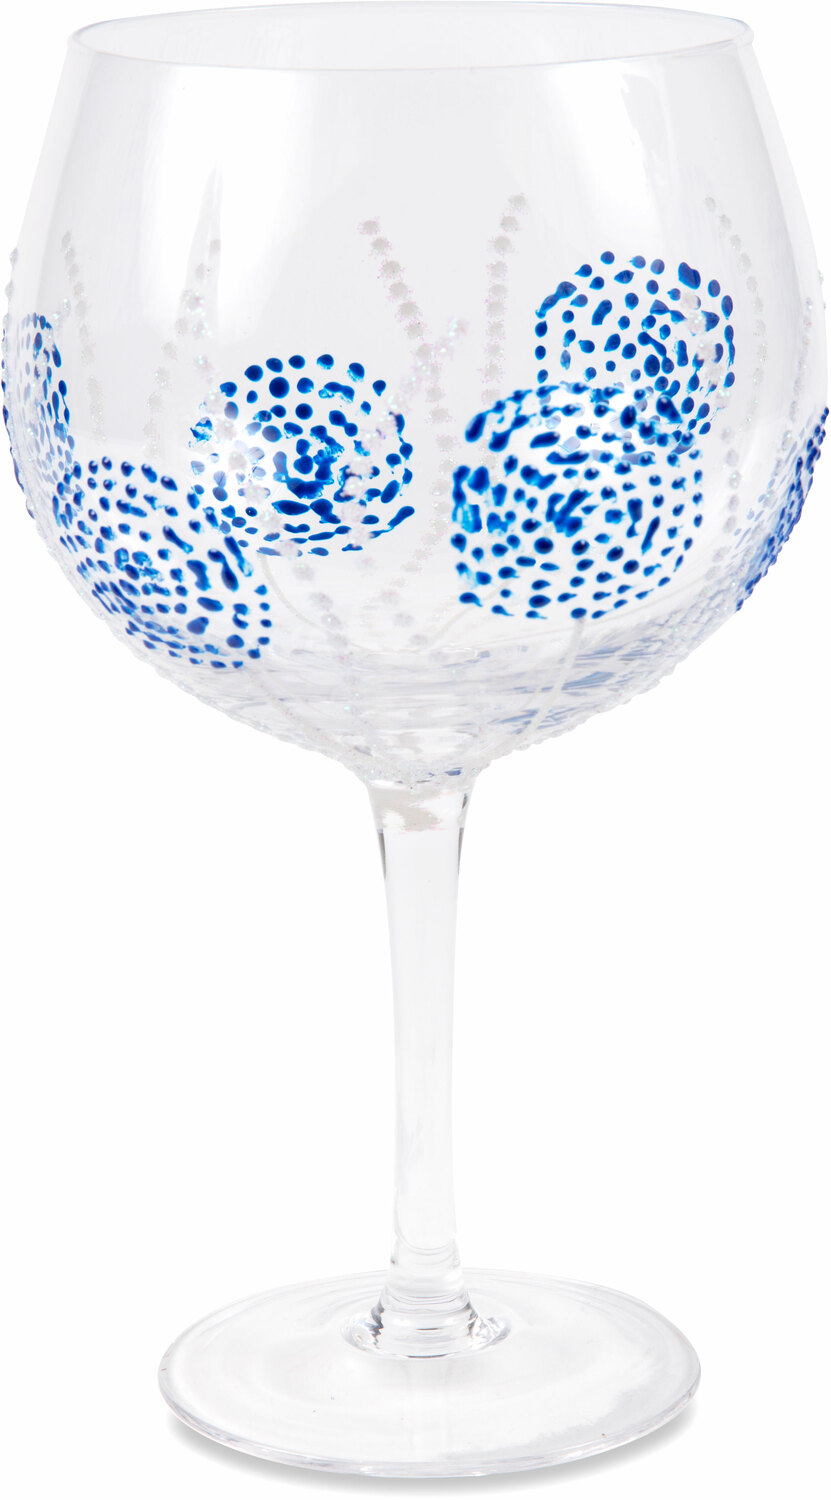 Blue Circles by Sunny by Sue - Blue Circles - 24 oz Hand Decorated Glass